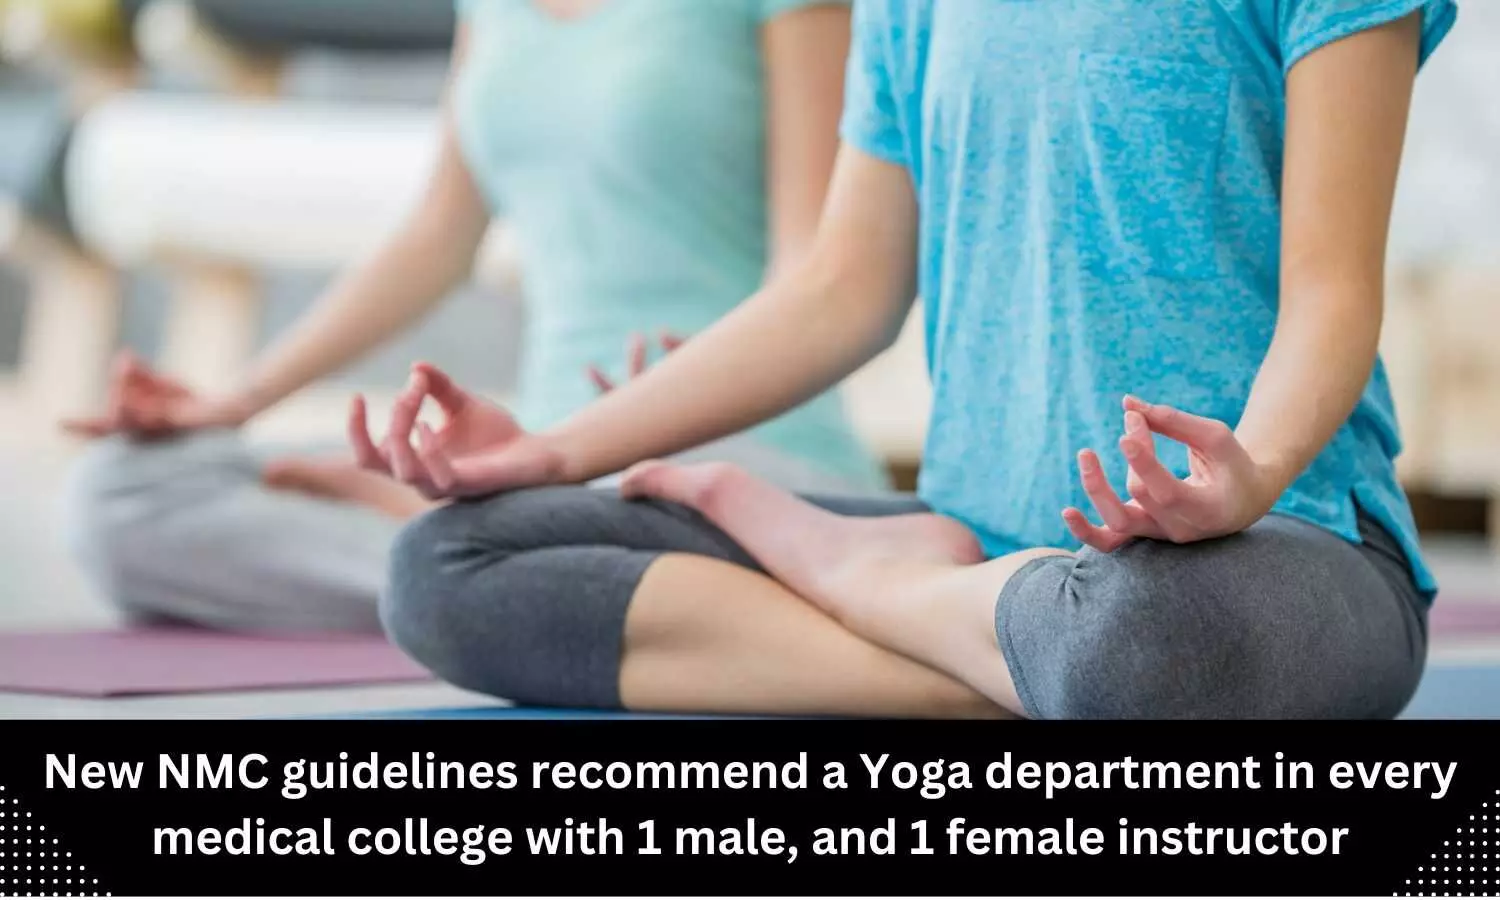 NMC new guidelines recommend yoga department in every medical college